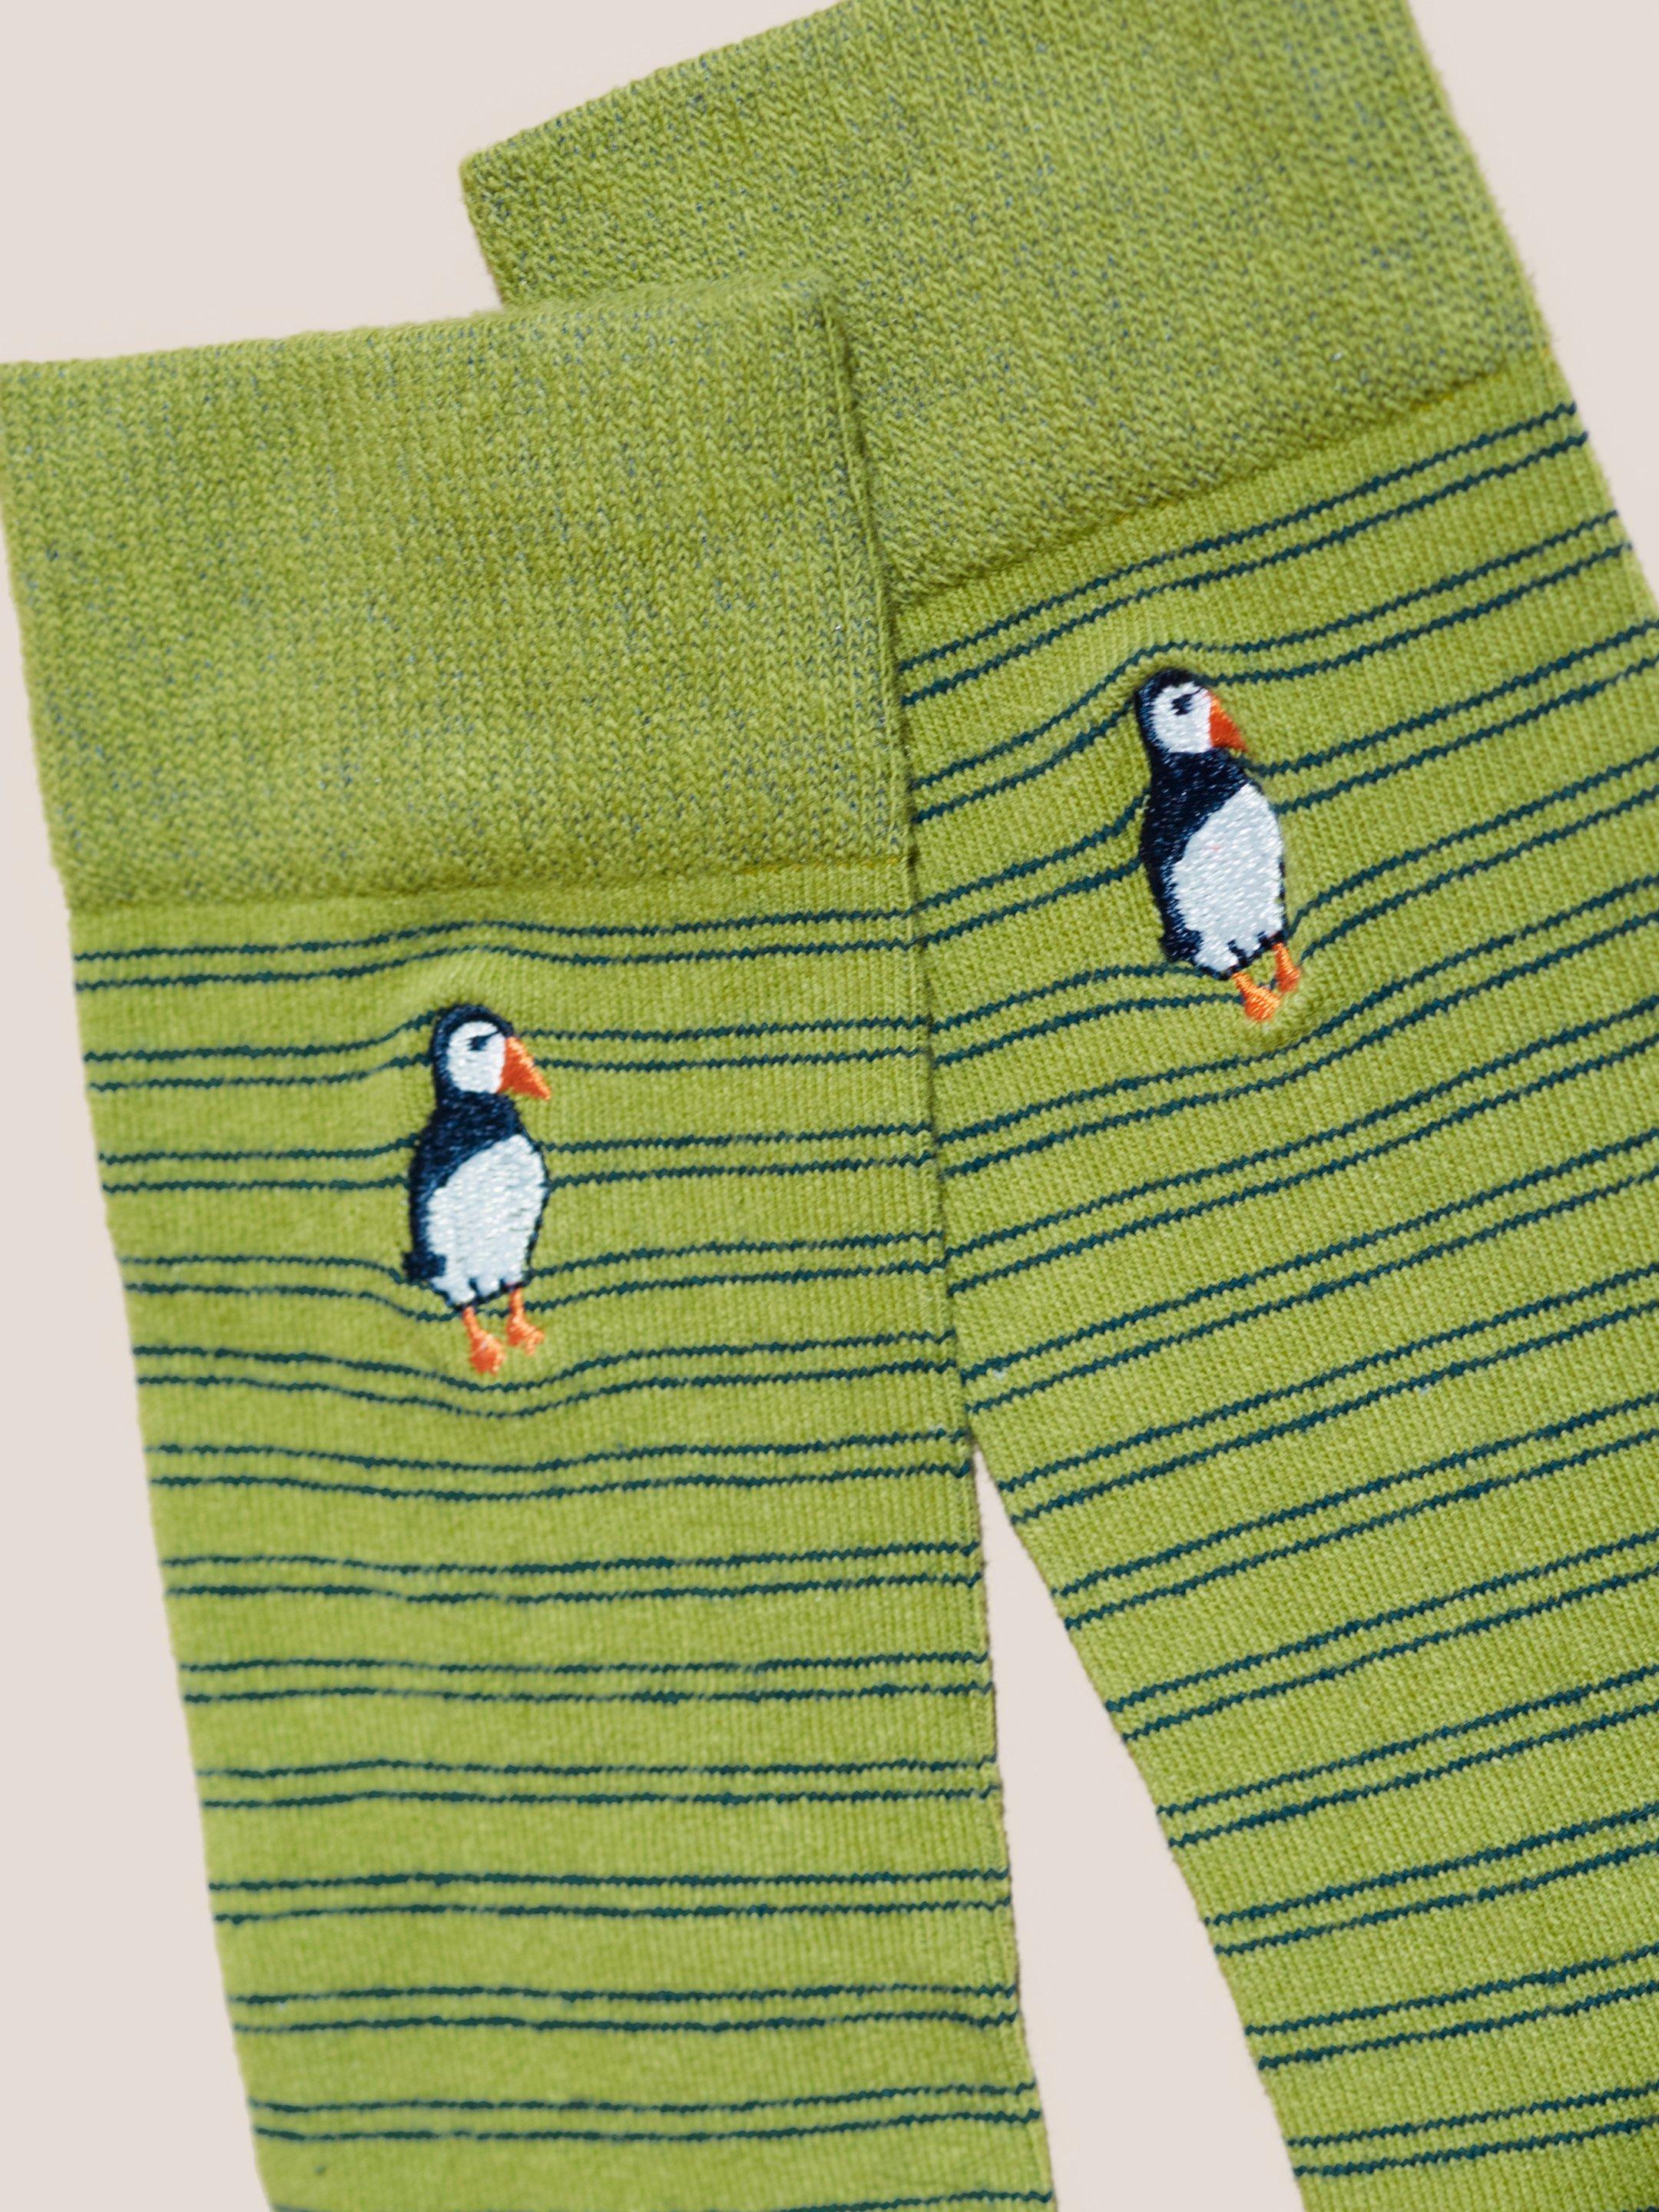 Puffin Embroidered Sock